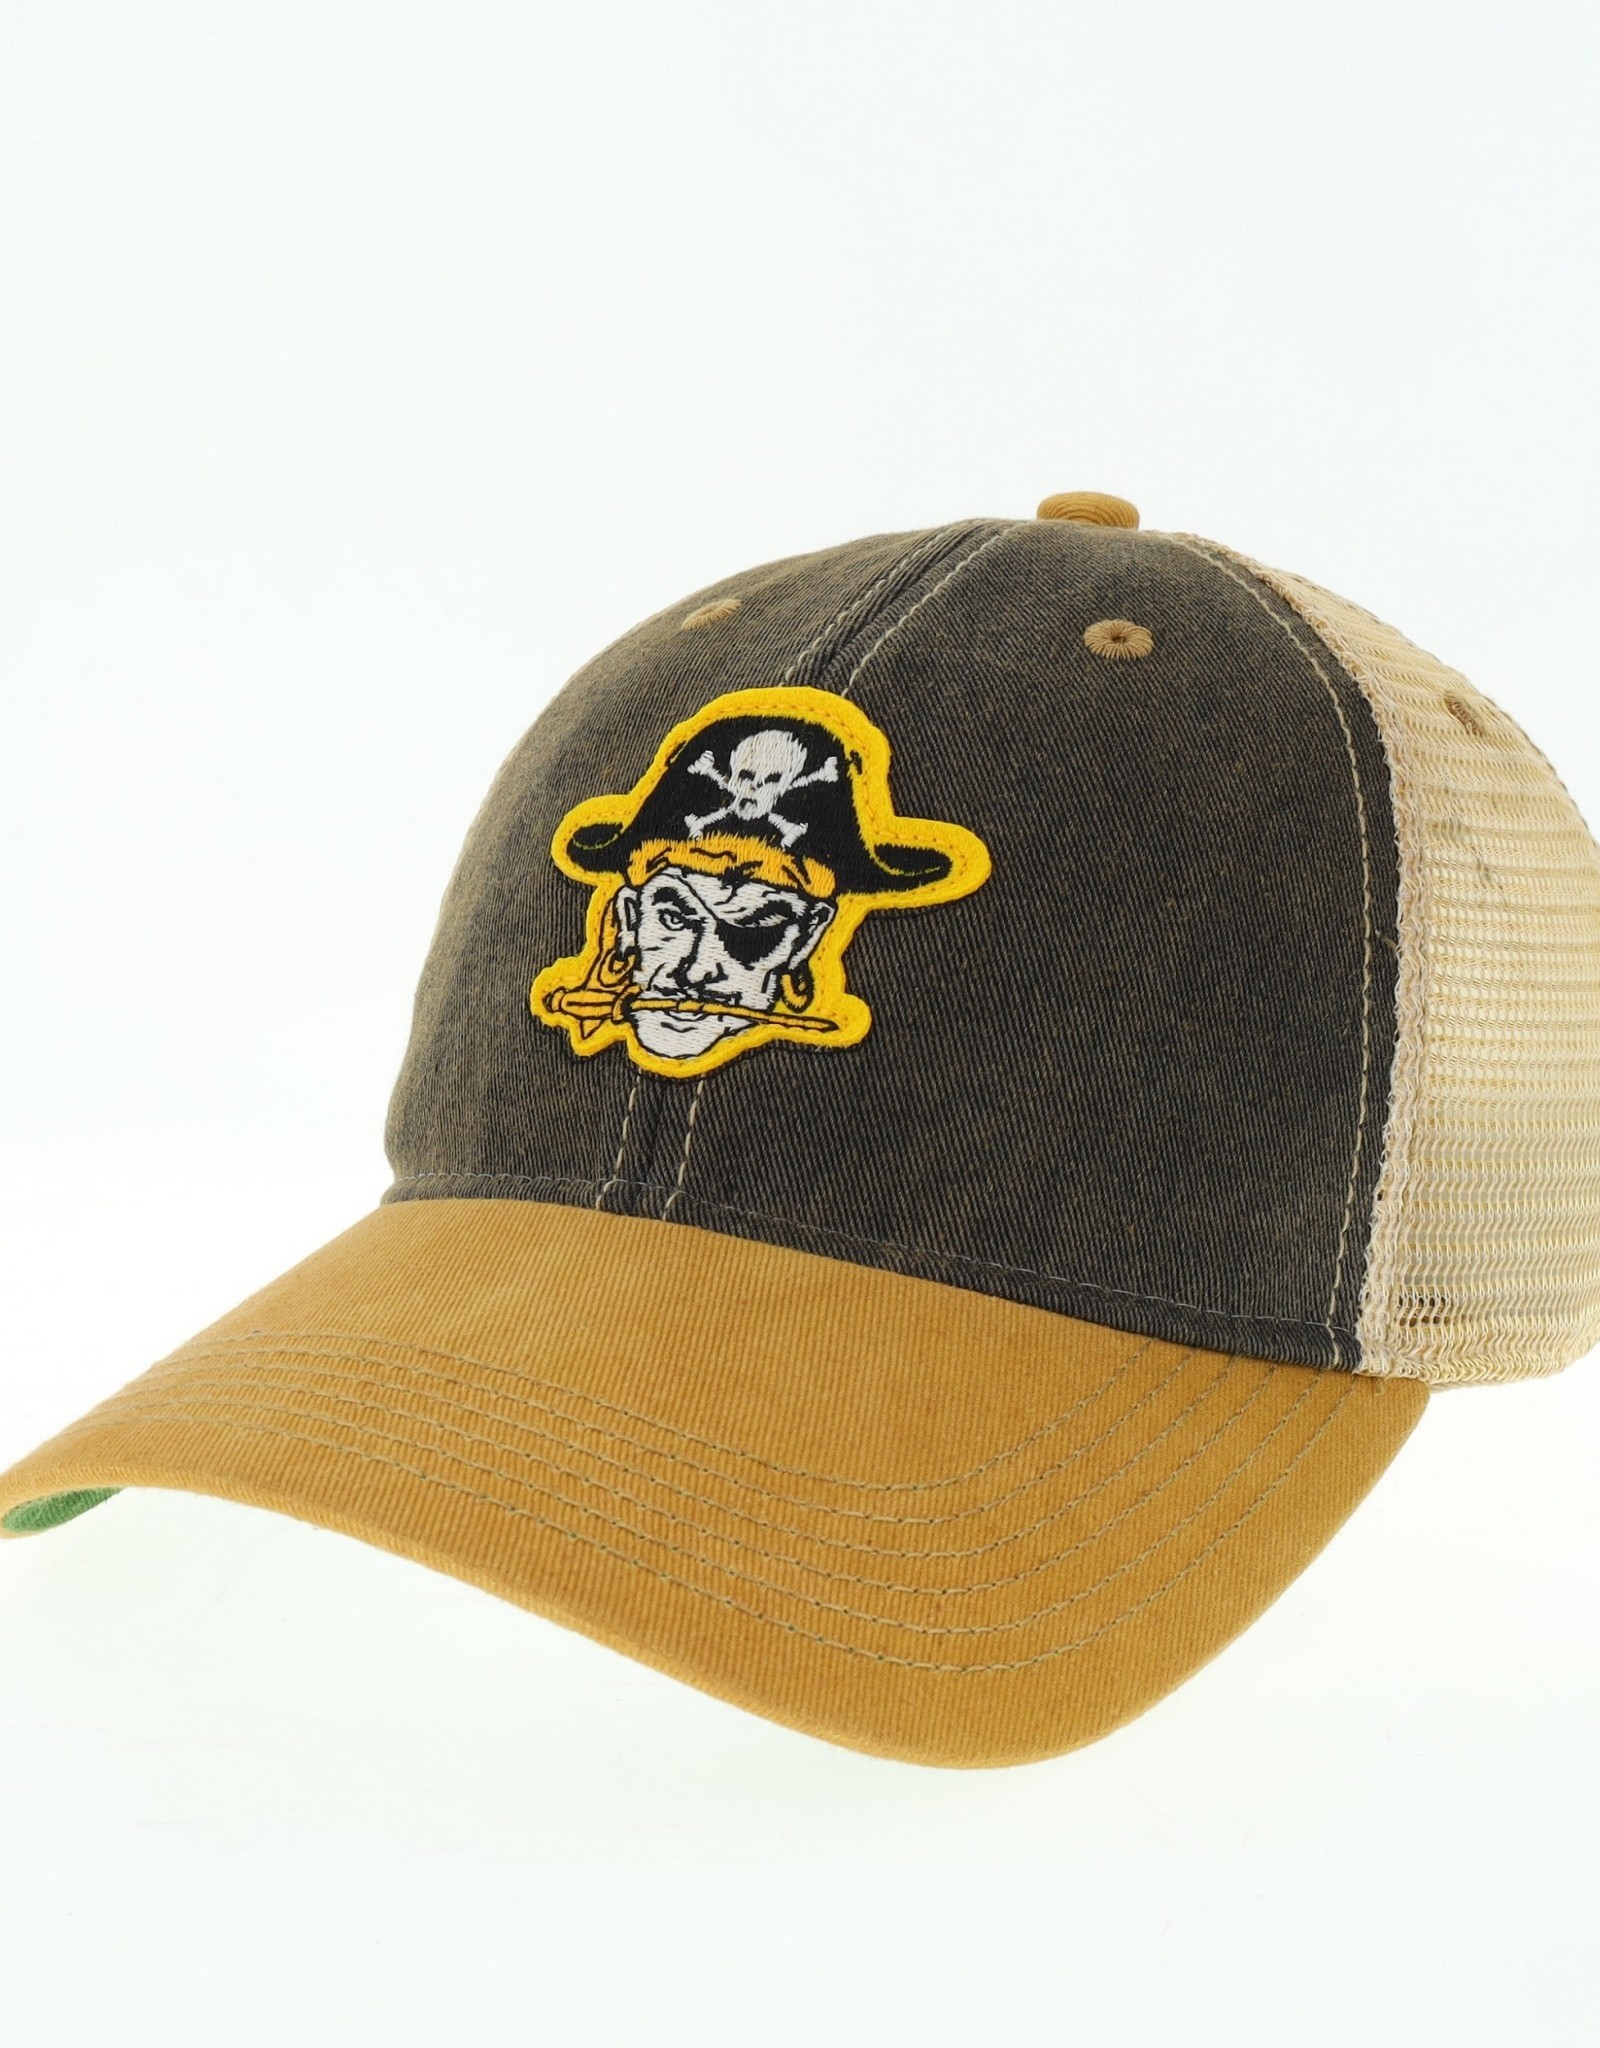 League Old Favorite Trucker with Pirate Black/Yellow